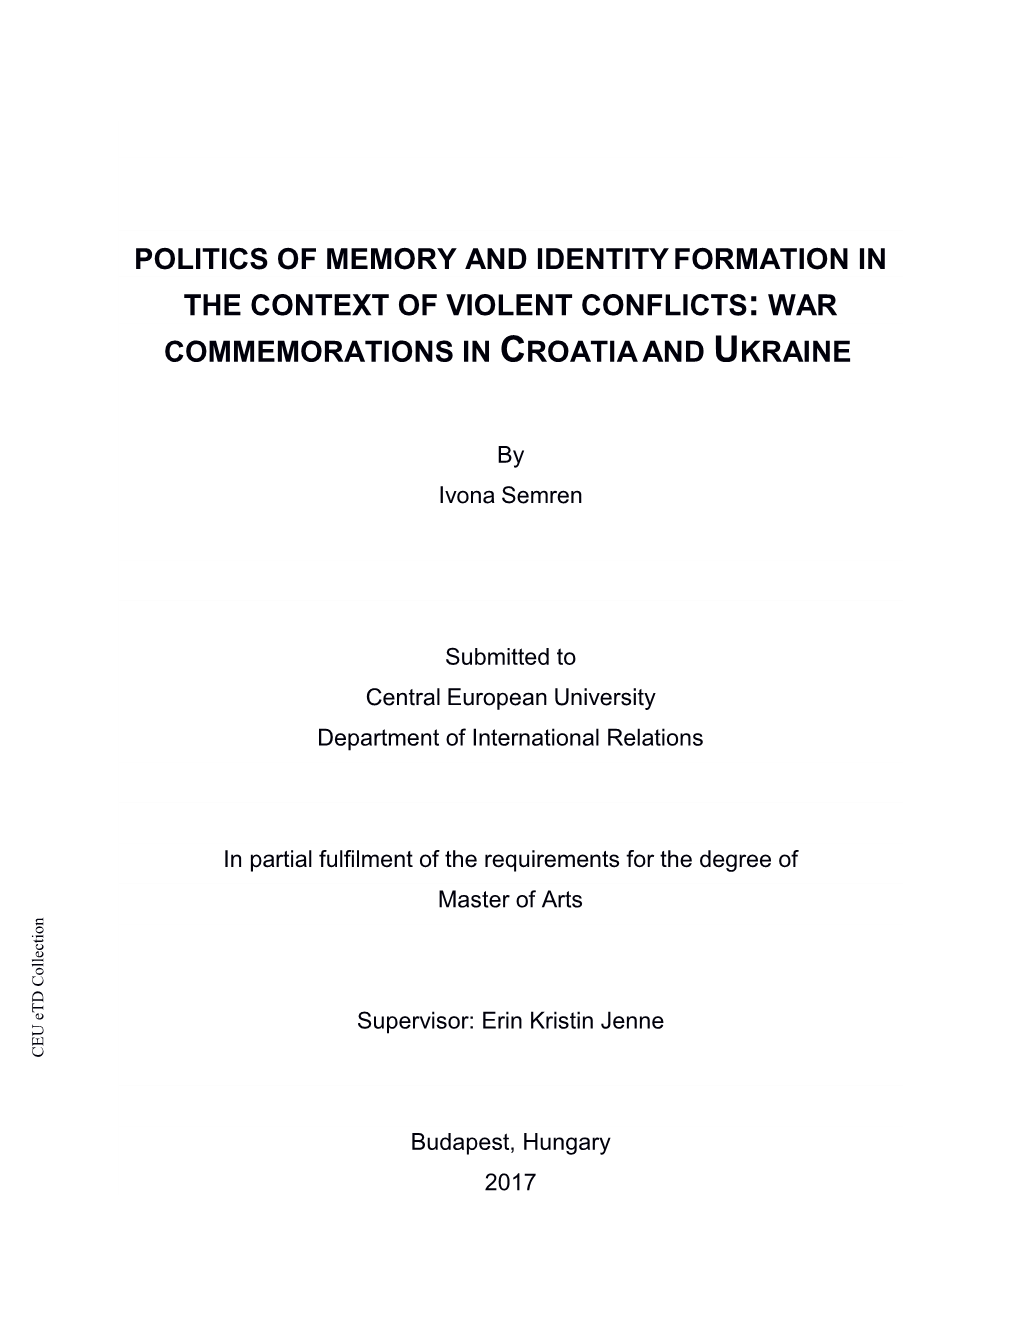 Politics of Memory and Identityformation in The